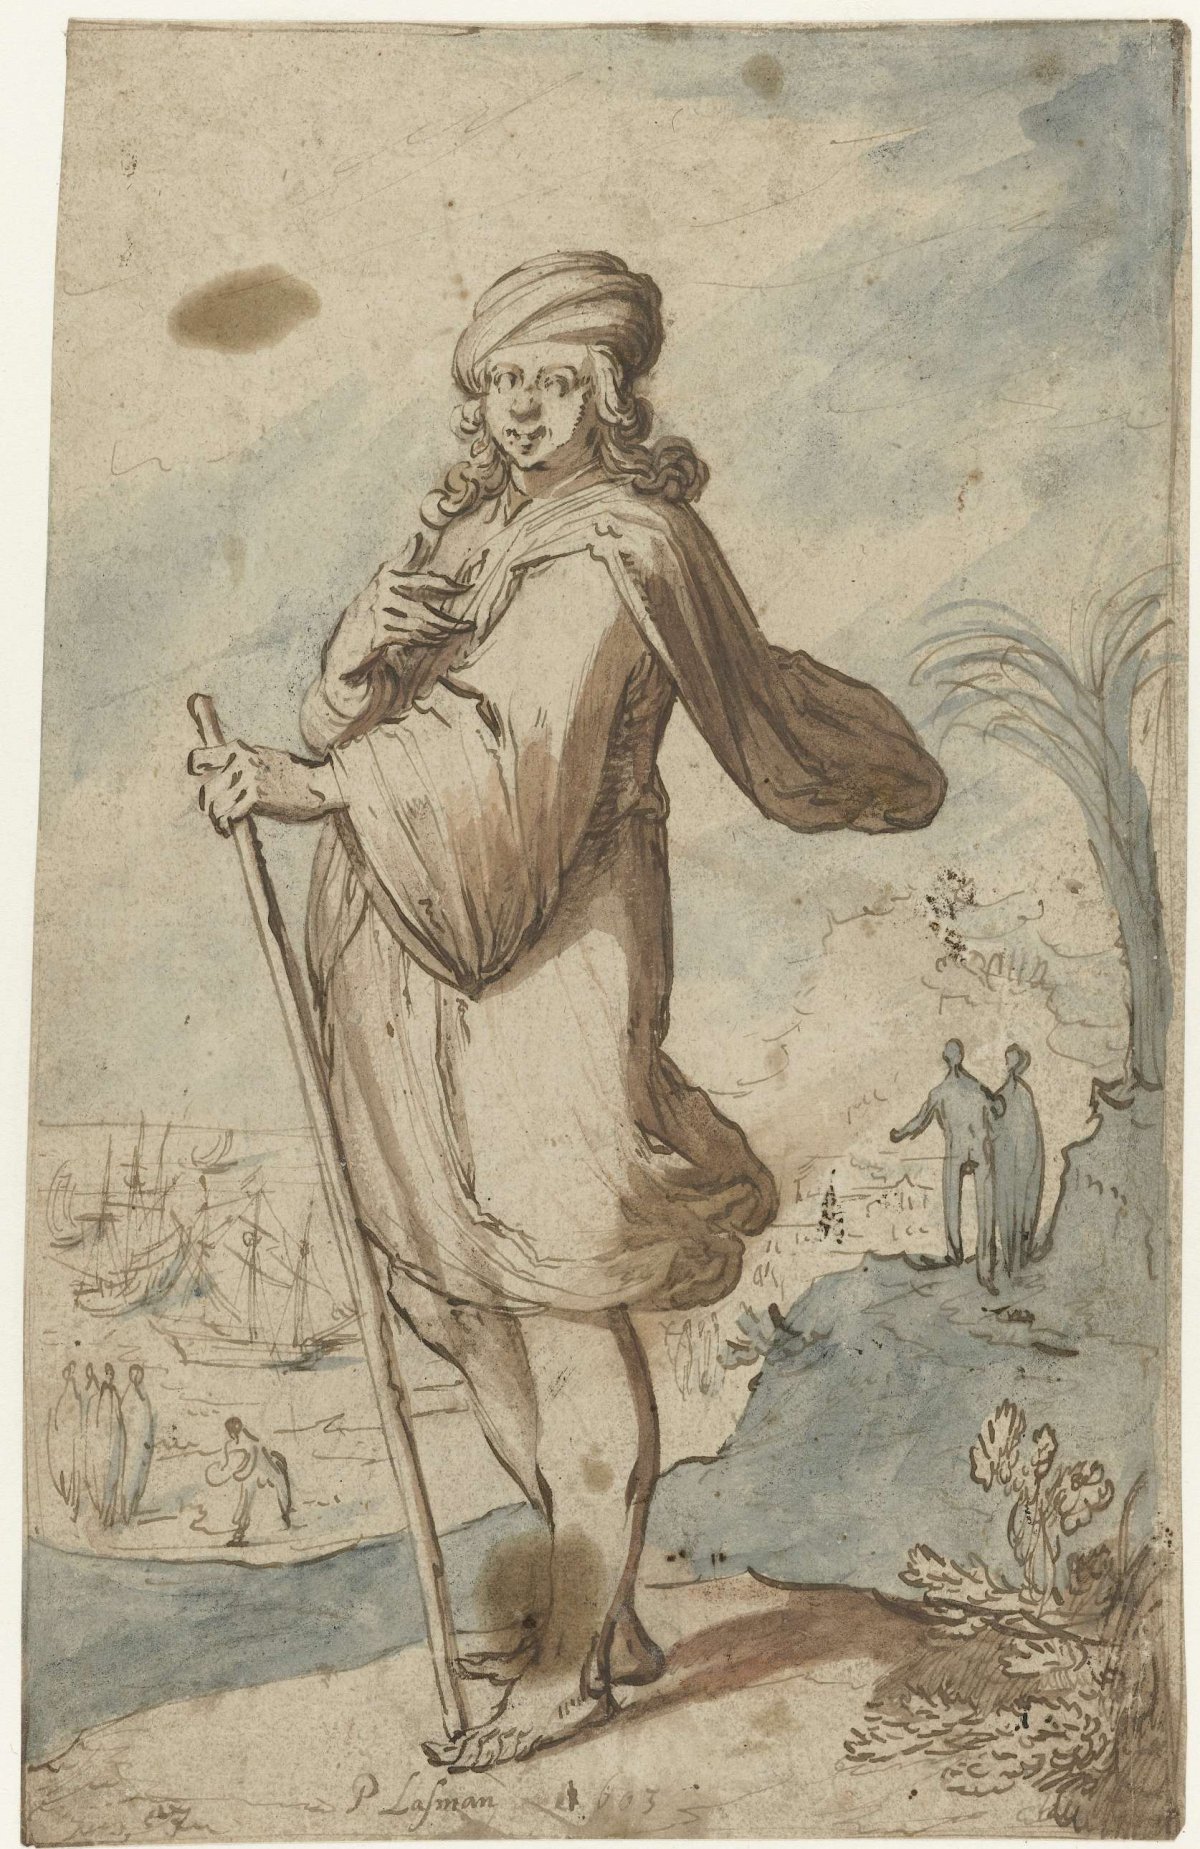 Standing Figure with a Turban, Seen from the Side, Pieter Lastman, 1603